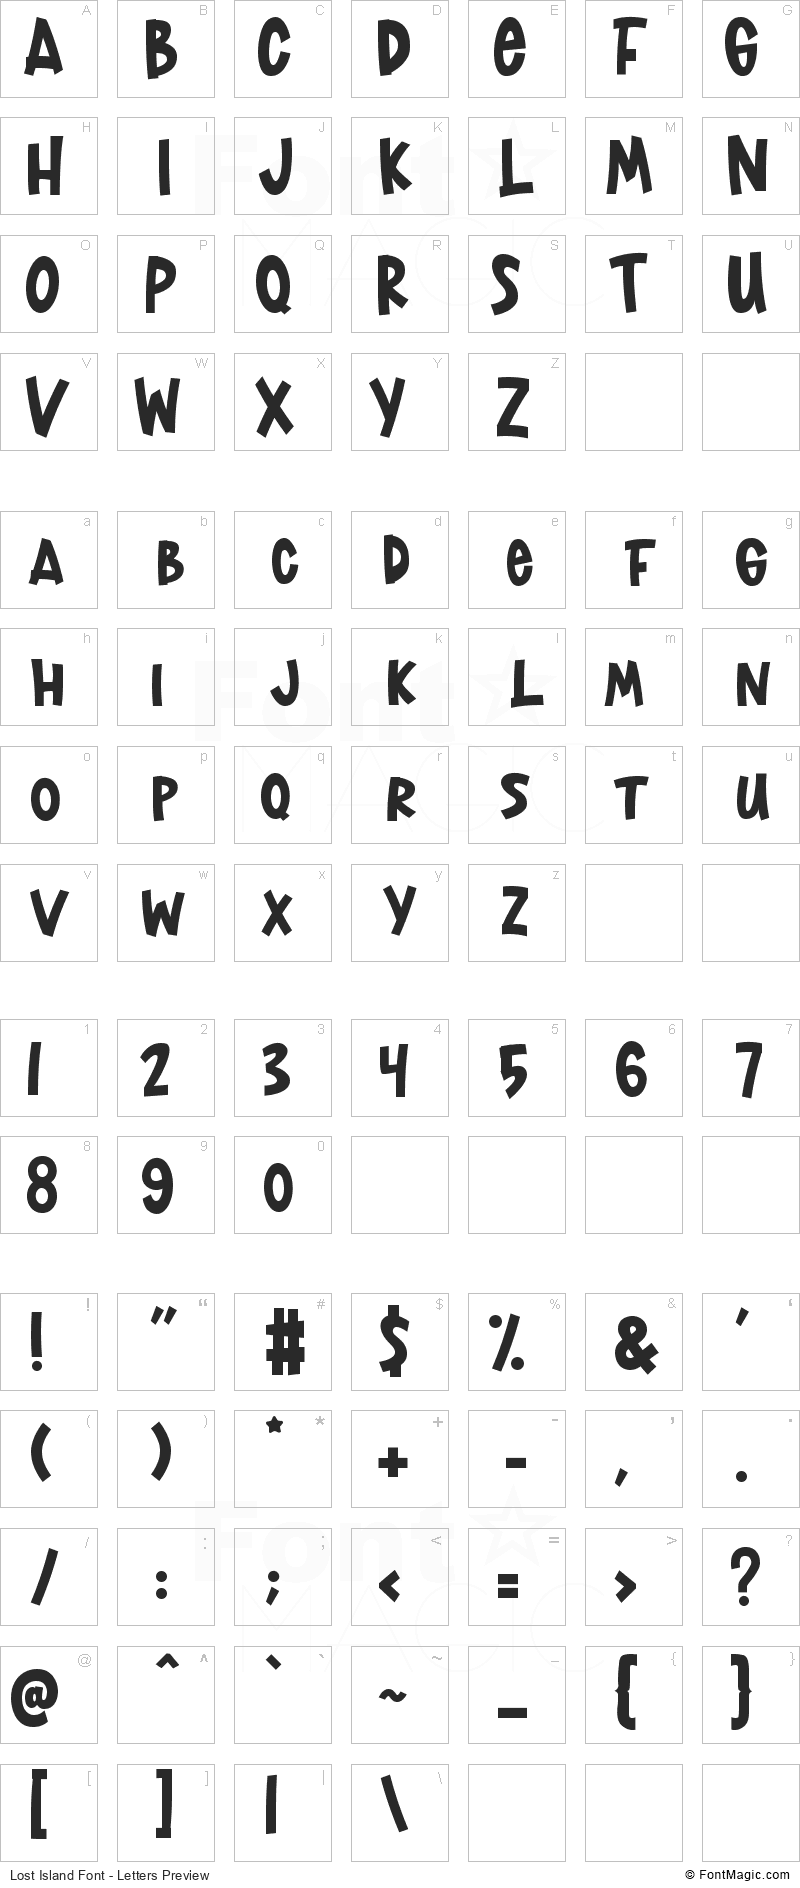 Lost Island Font - All Latters Preview Chart